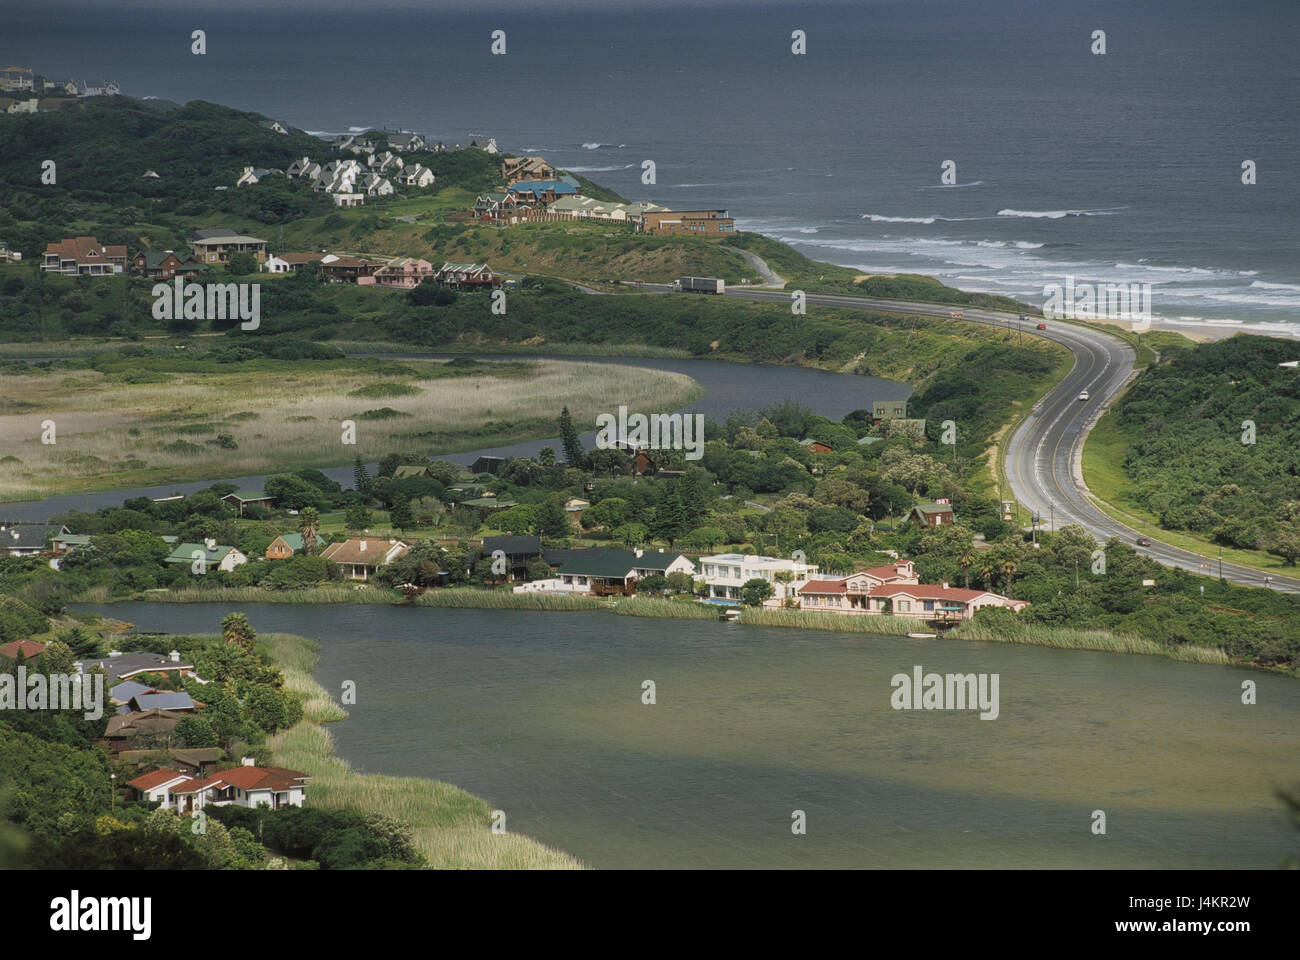 South Africa, western cape, guards route, Wilderness, local overview RSA, Africa, South Africa, west cape, west cape country, coast, coastal scenery, scenery, overview, Indian ocean, sea, place, place, houses, residential houses, place of interest, destination, Küstenstrasse, wetland, view, Stock Photo